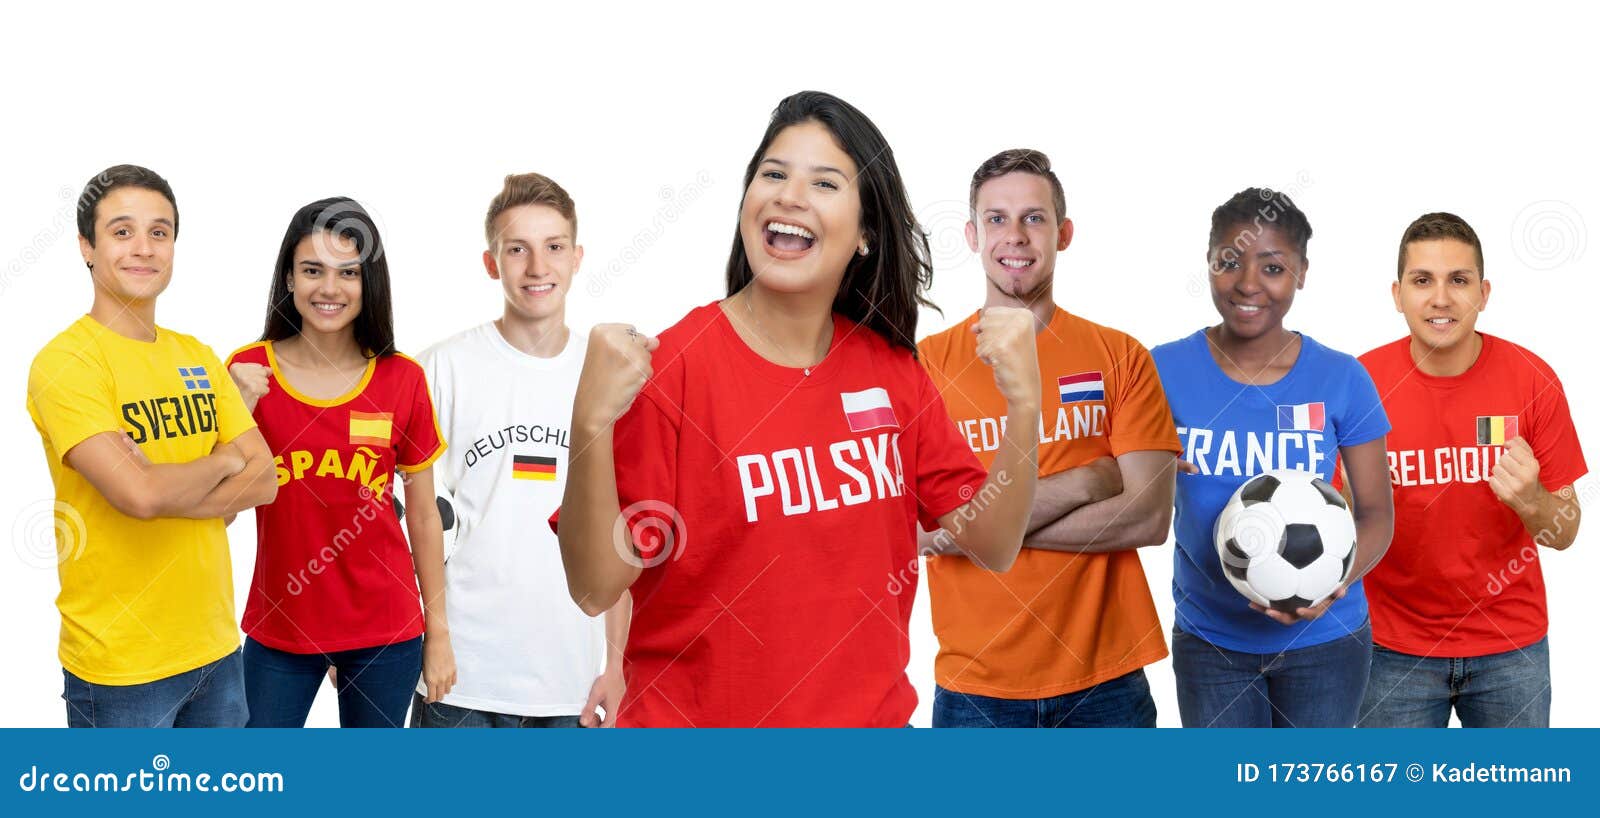 cheering soccer fan from poland with supporters from other european countries